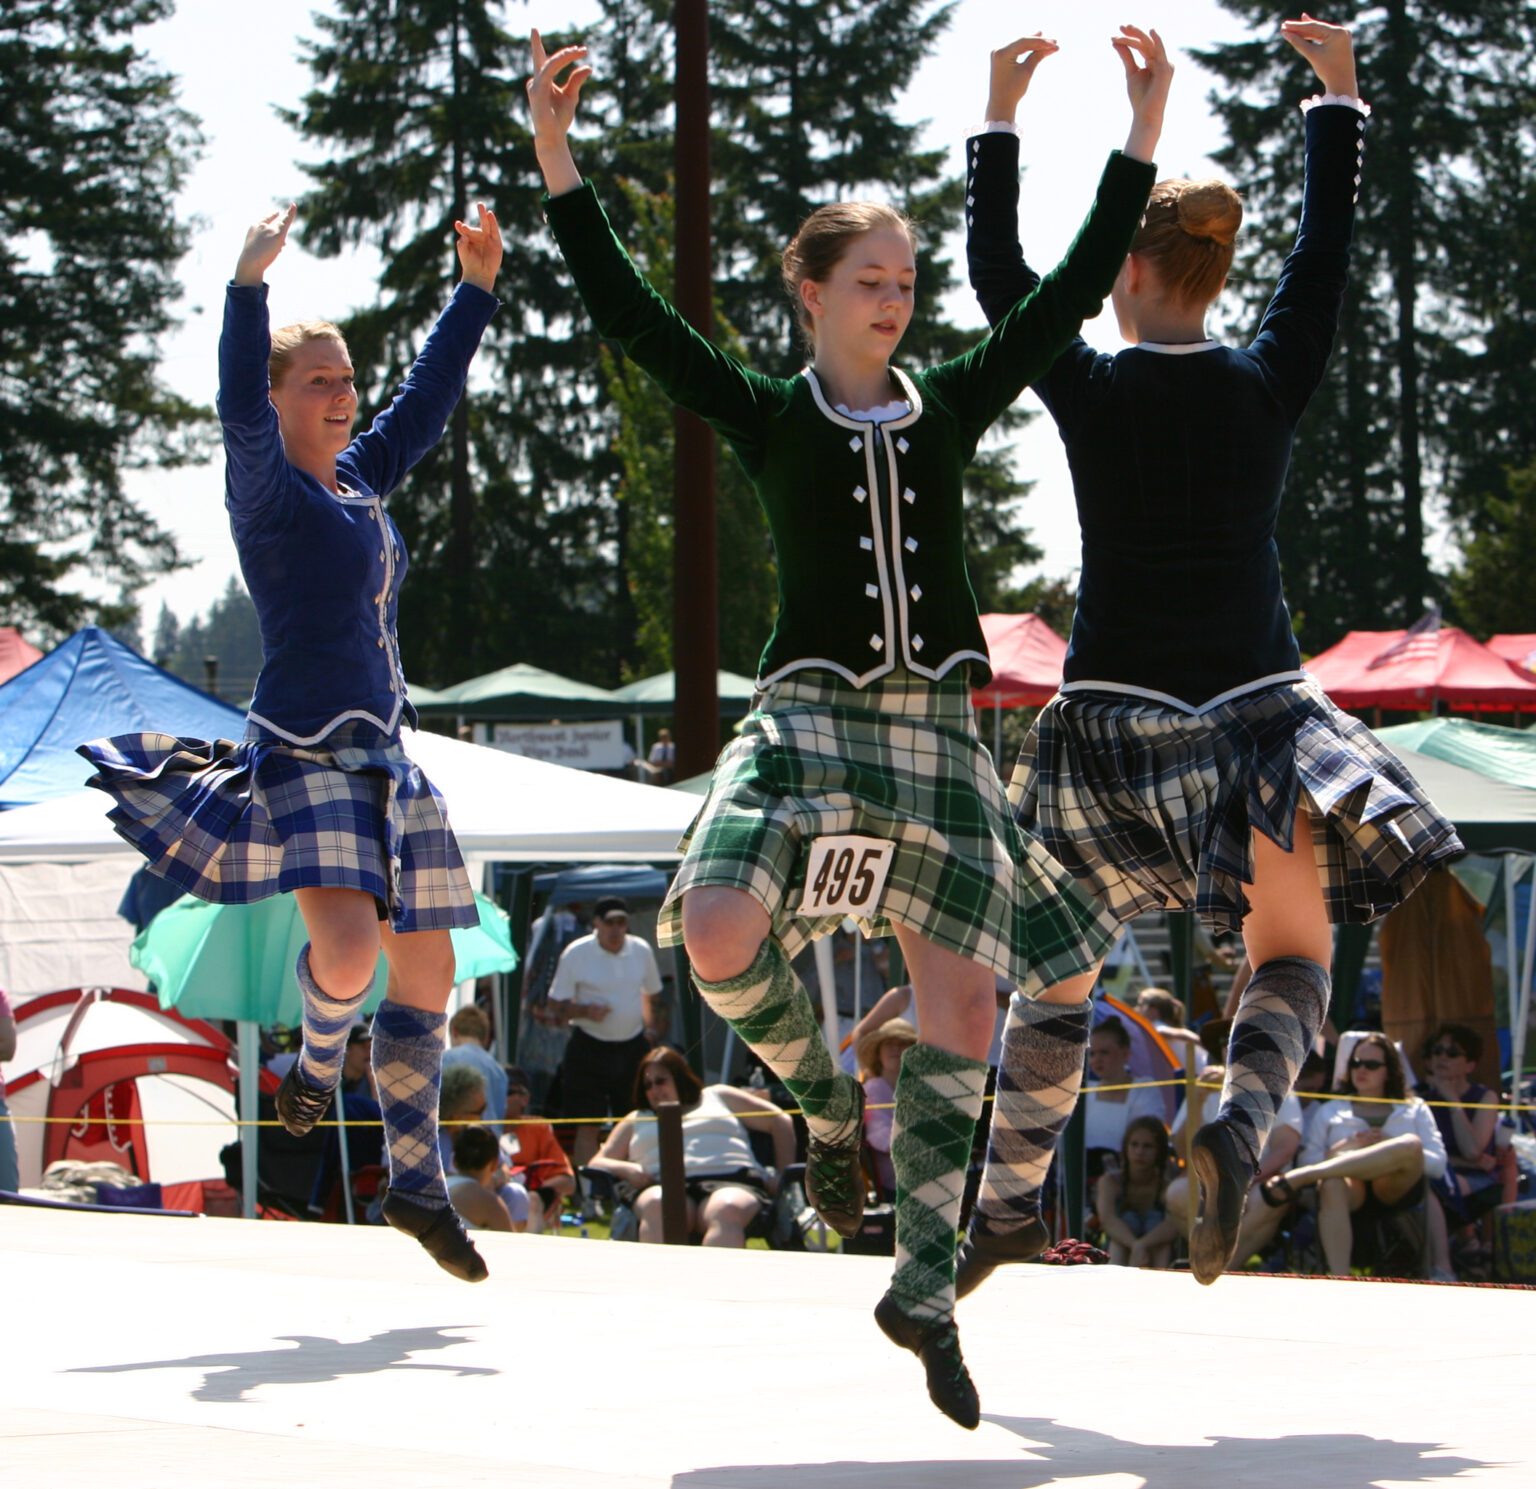 Highland dancing is among the events that will be featured at the 26th annual Skagit Valley Highland Games Saturday